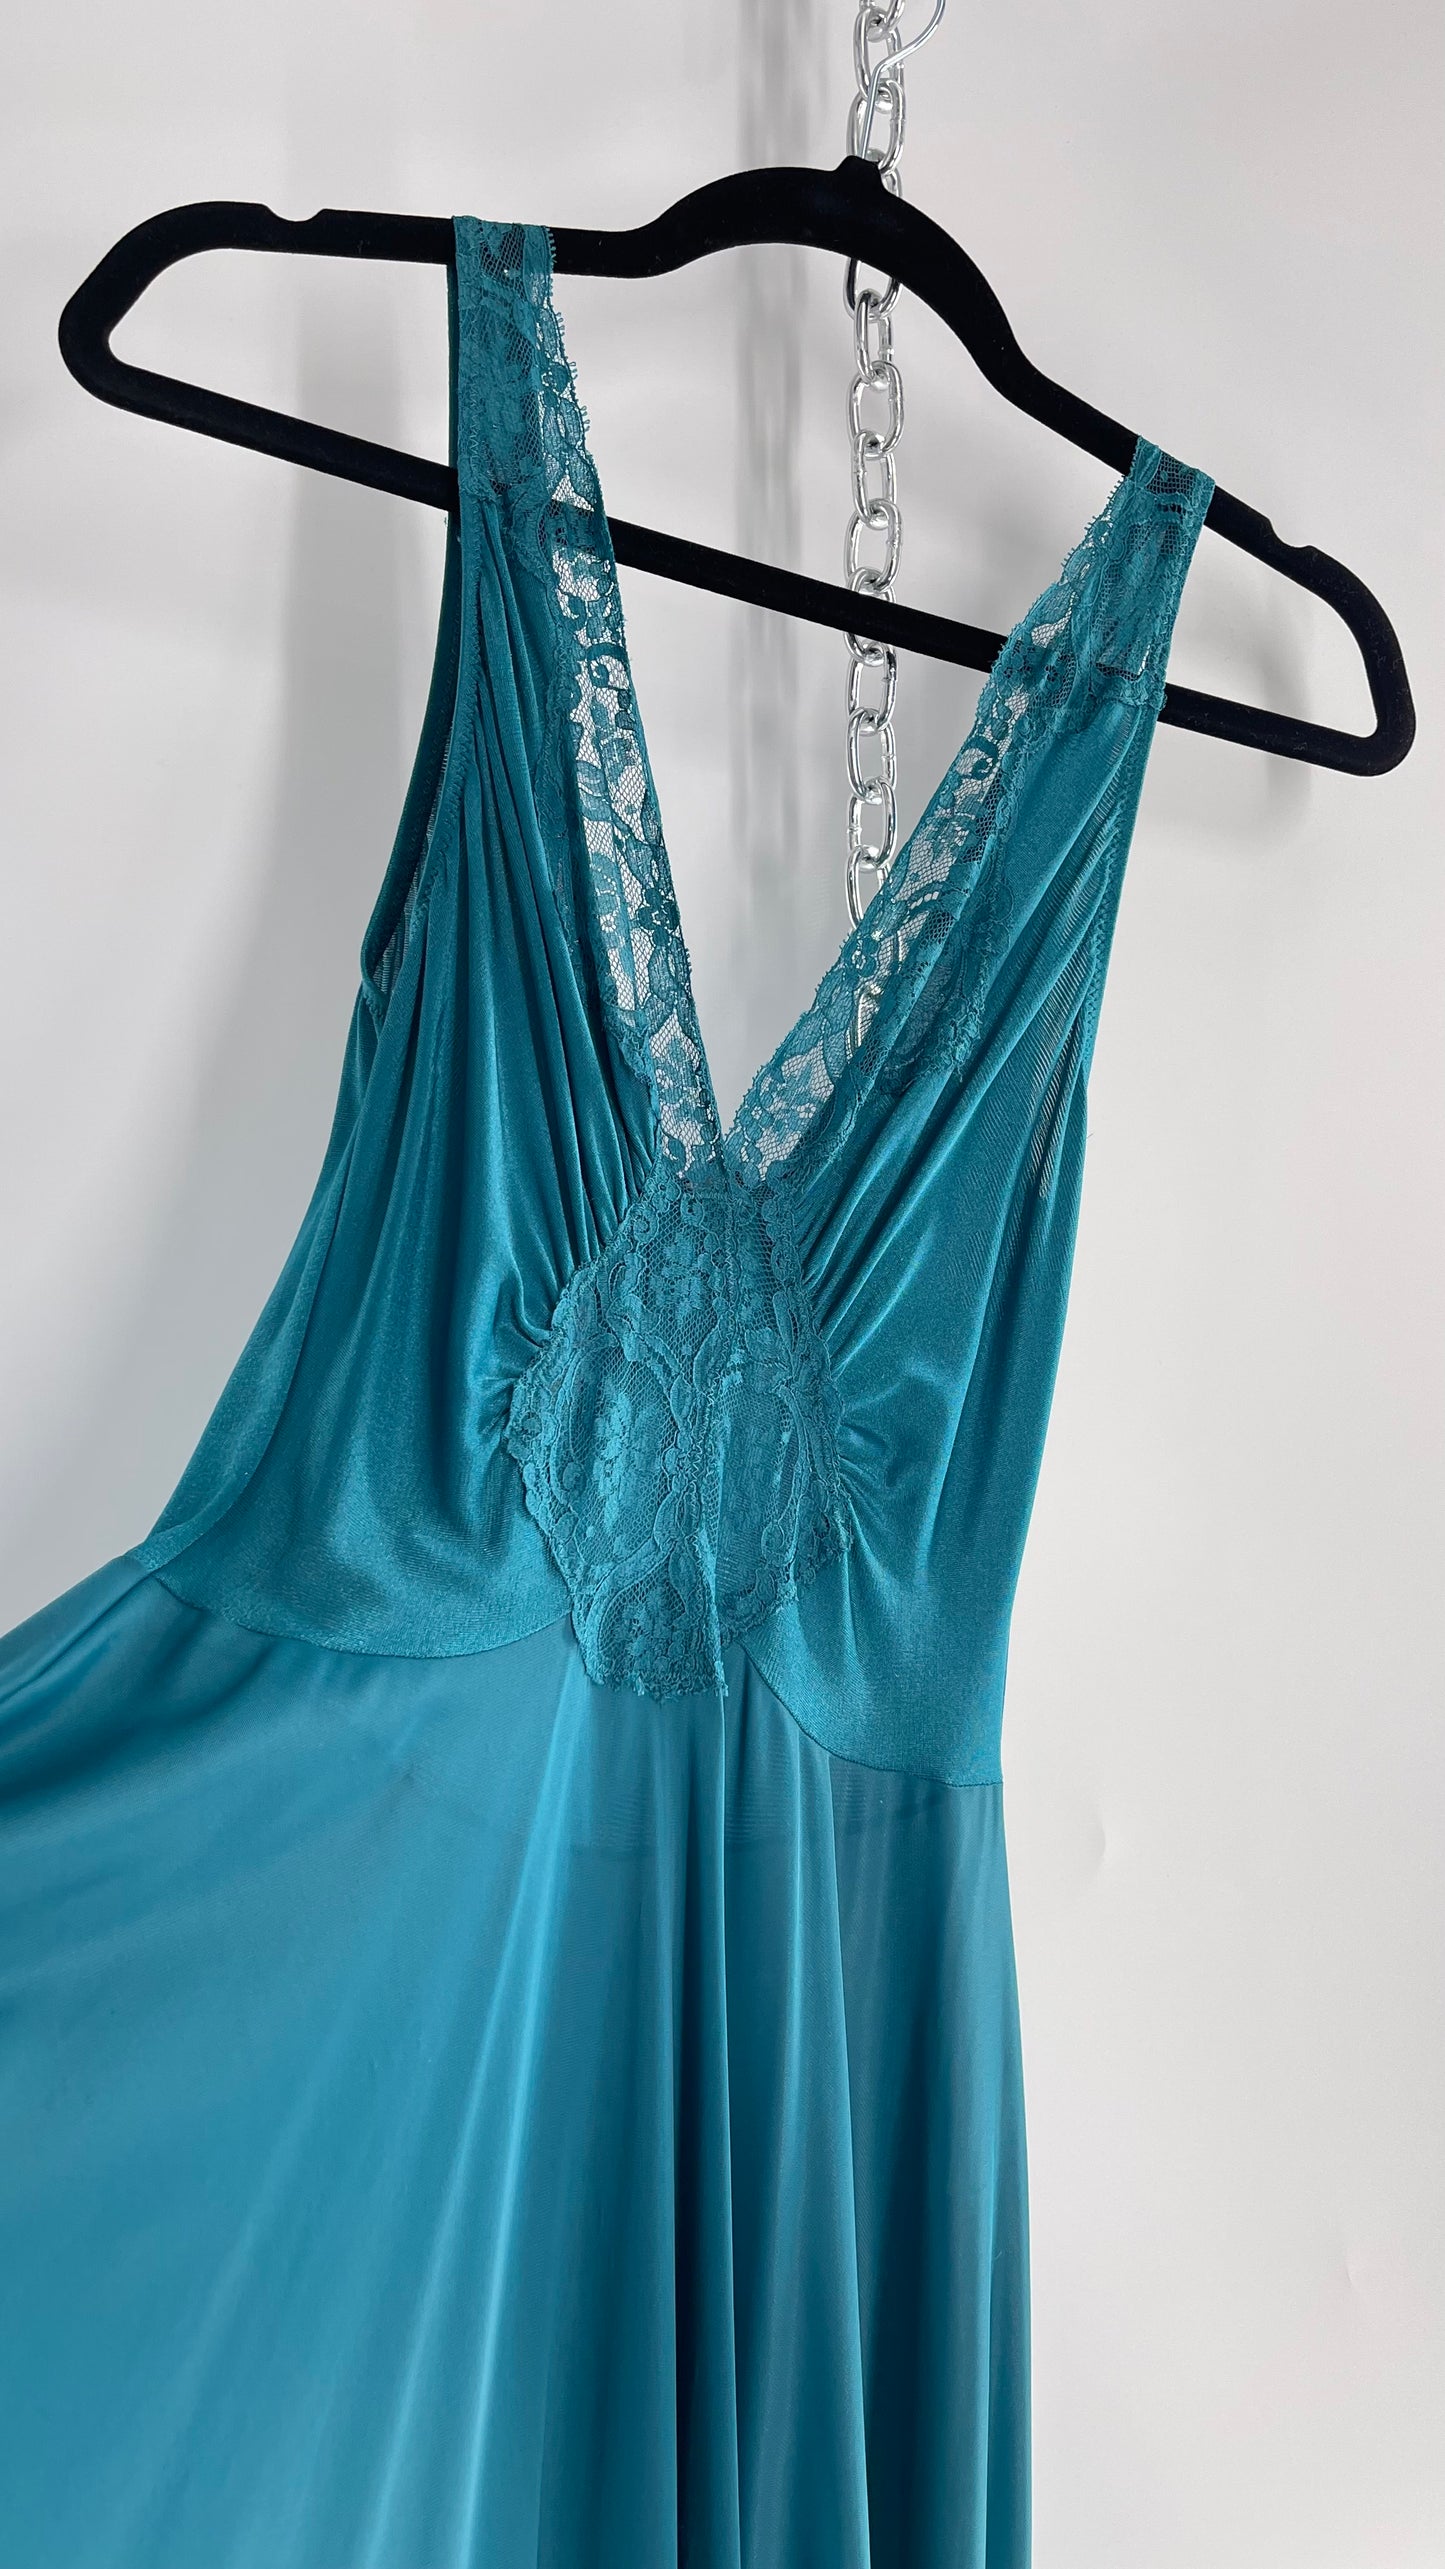 Vintage Olga Intimates Floor Length Voluminous Blue Jewel Toned Maxi Dress/Night Gown with Lace Bust (Small)